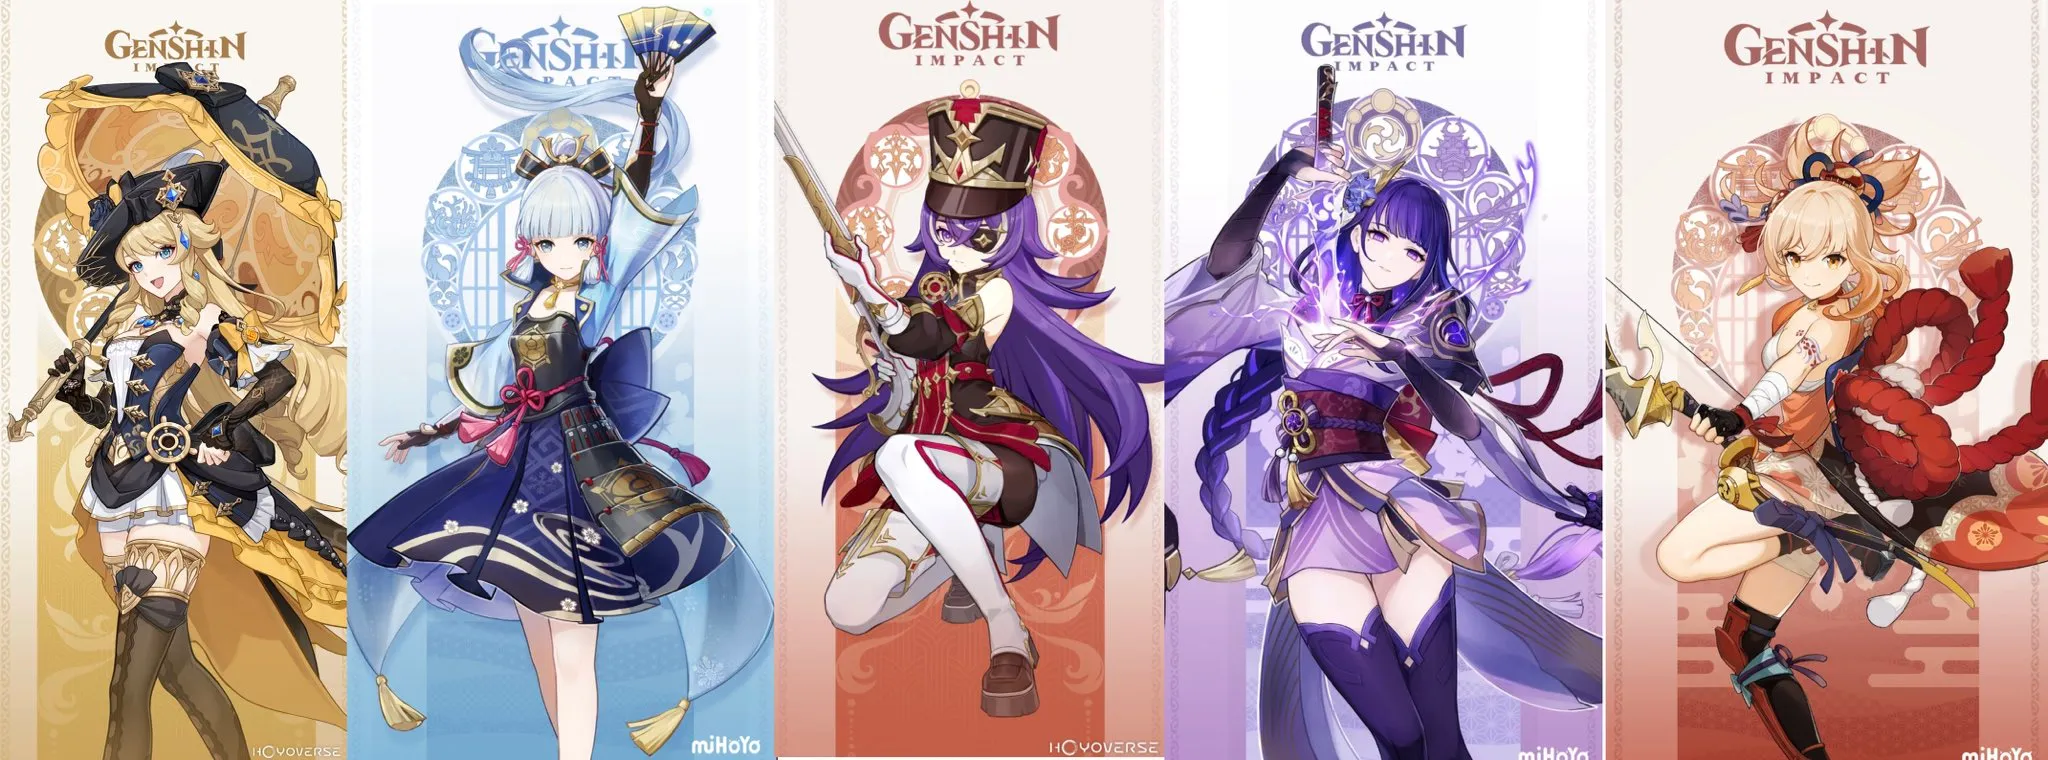 Genshin Impact 4.3 Release Date and Banners｜Game8